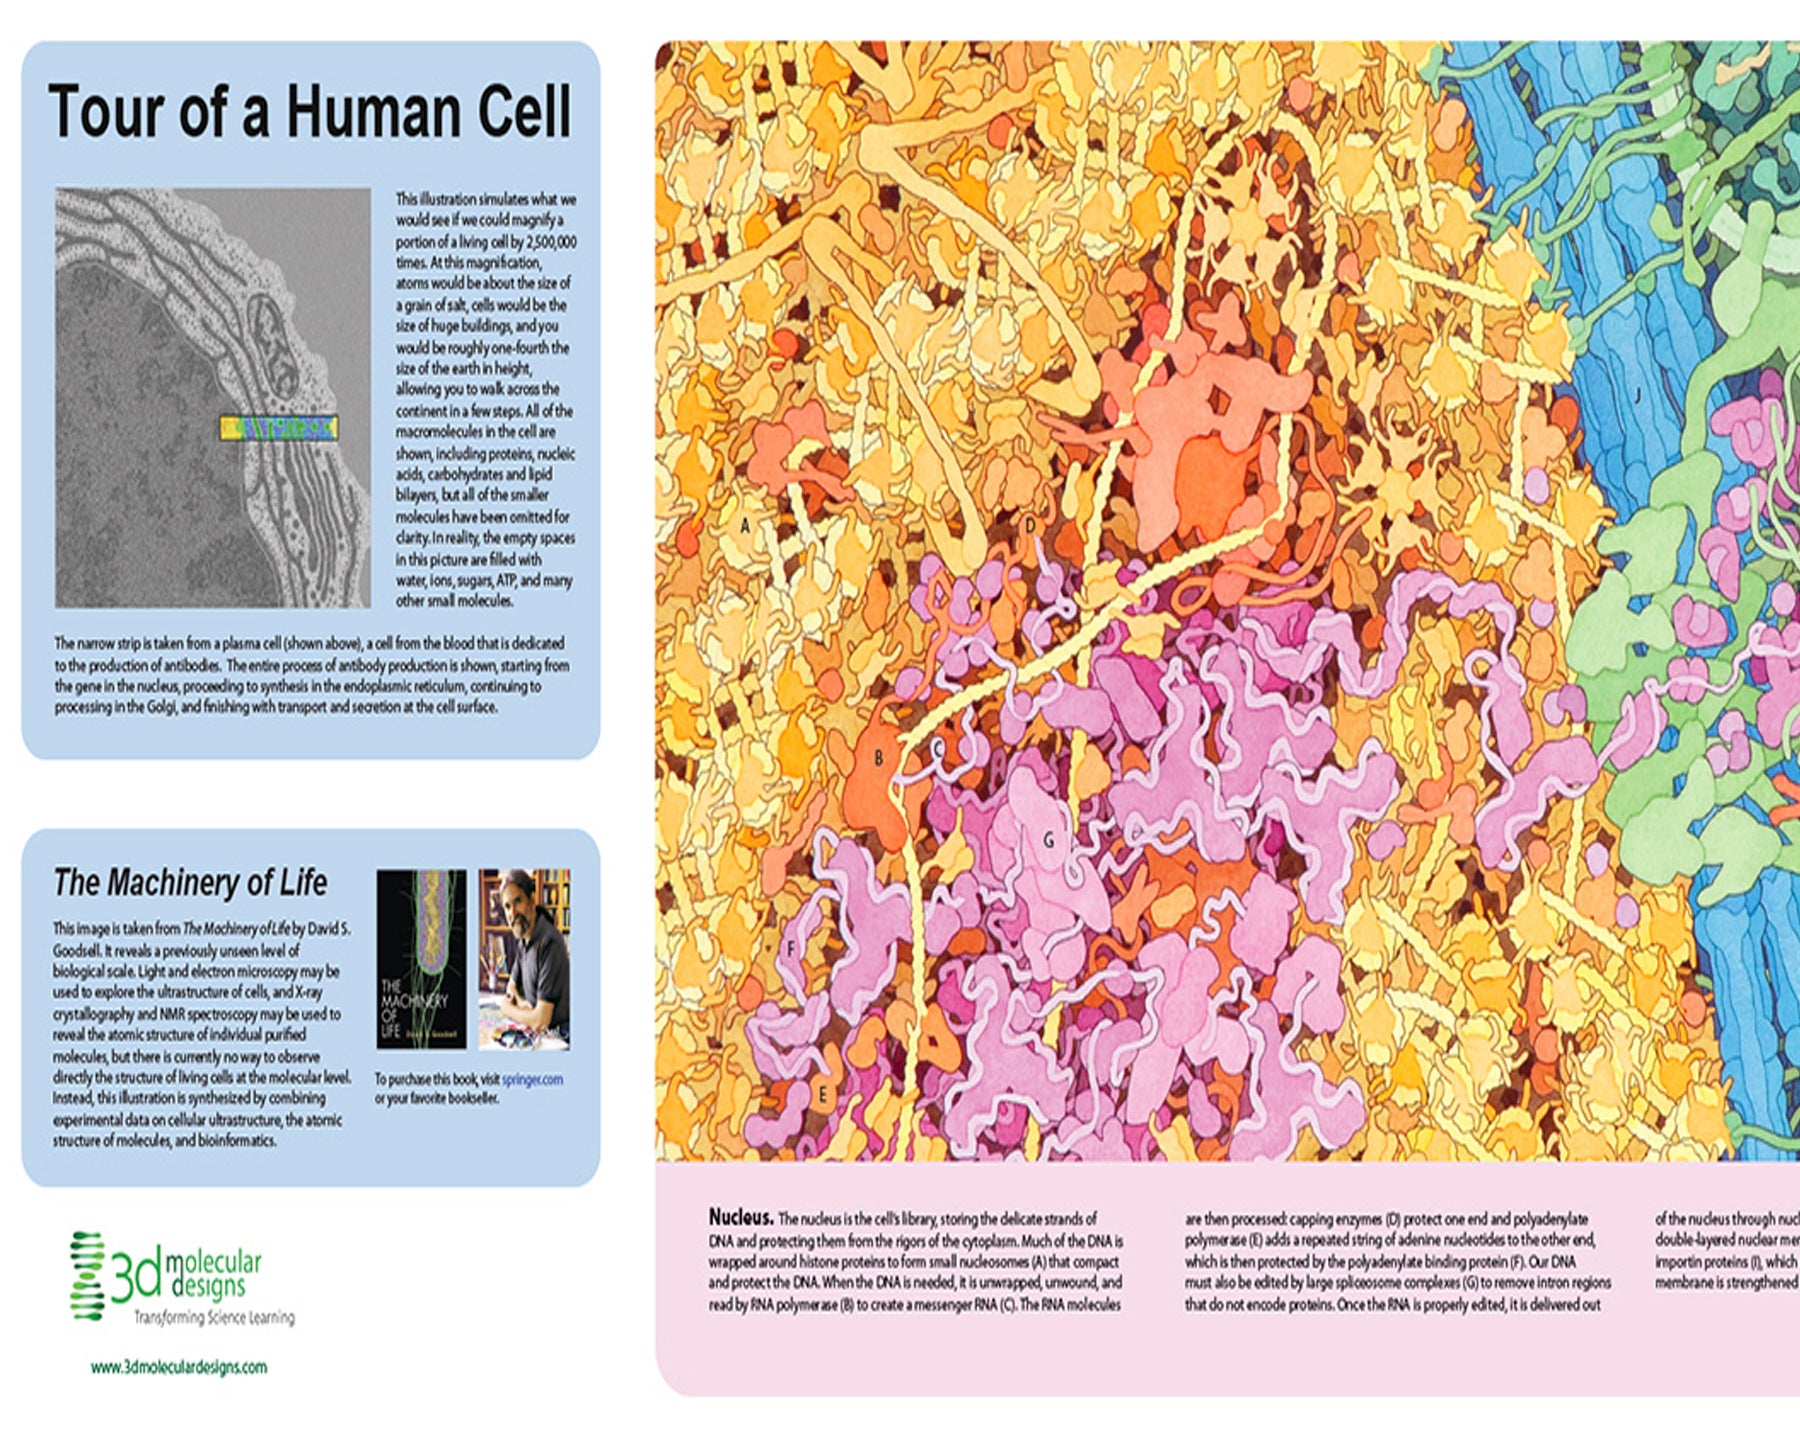 Tour of a Human Cell©